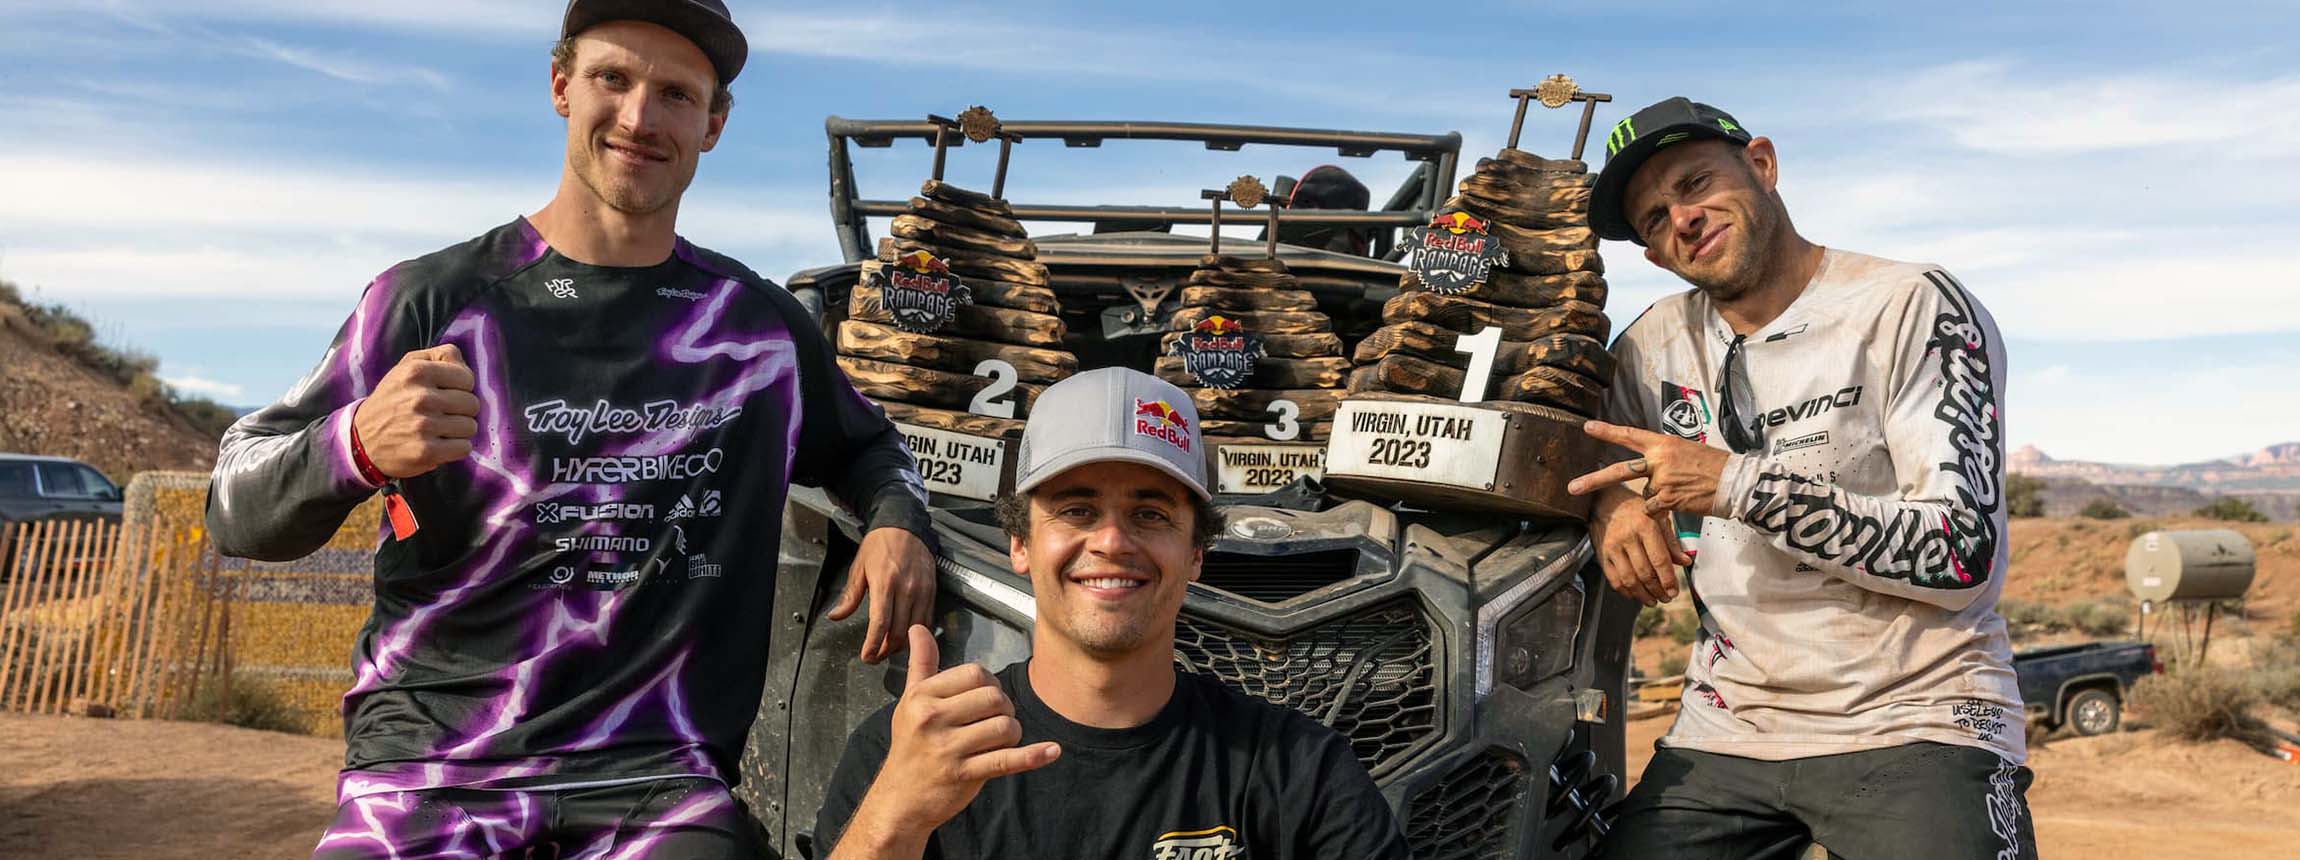 Tom Van Steenbergen, Carson Storch and Cam Zink pose for a portrait with their trophies at Red Bull Rampage in Virgin, Utah, USA on October 13, 2023.